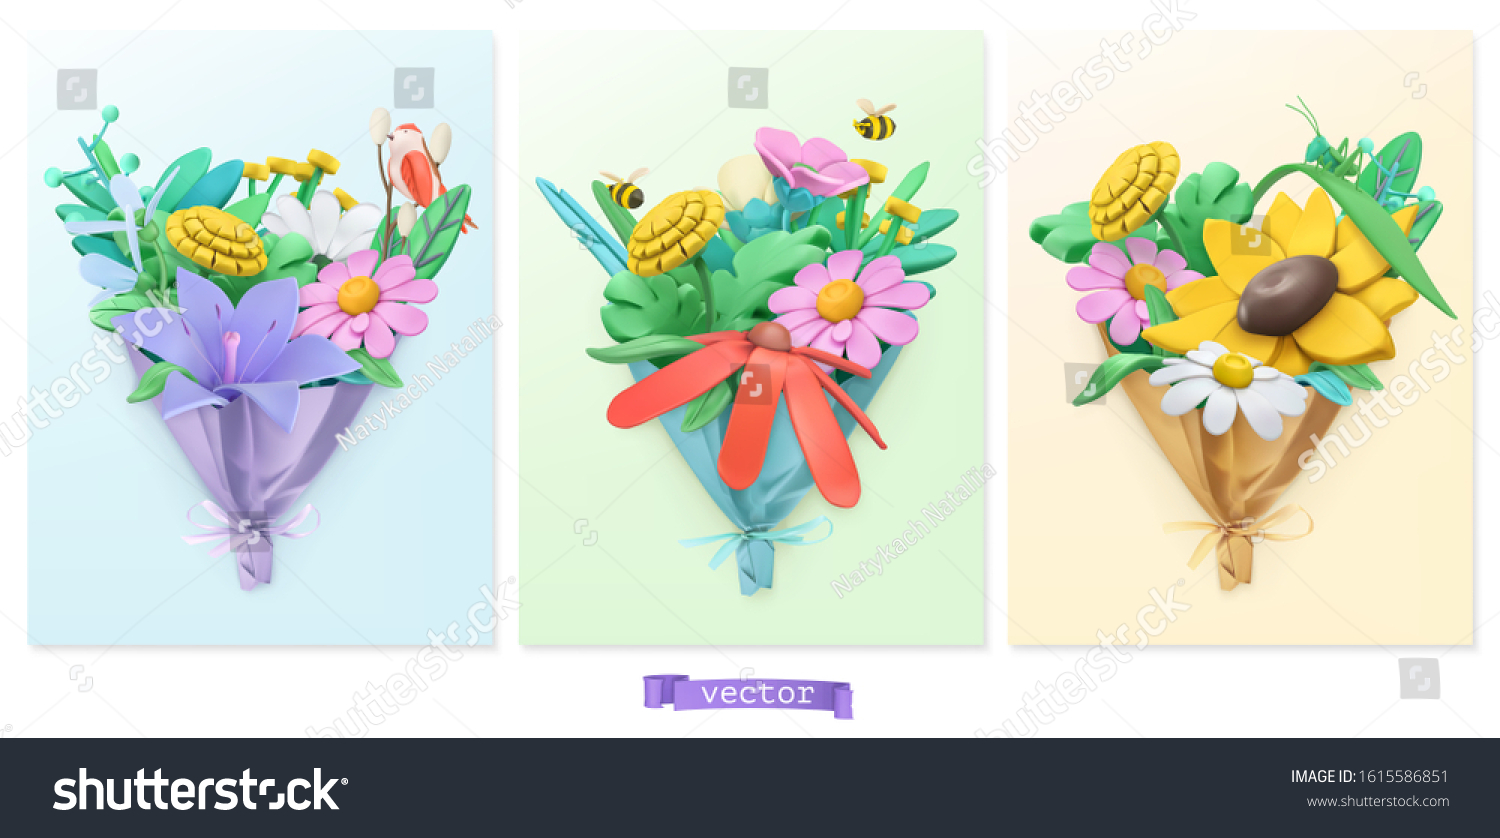 SVG of Wildflowers bouquet. Spring and summer plasticine art illustration. 3d vector objects. Nature icon set svg